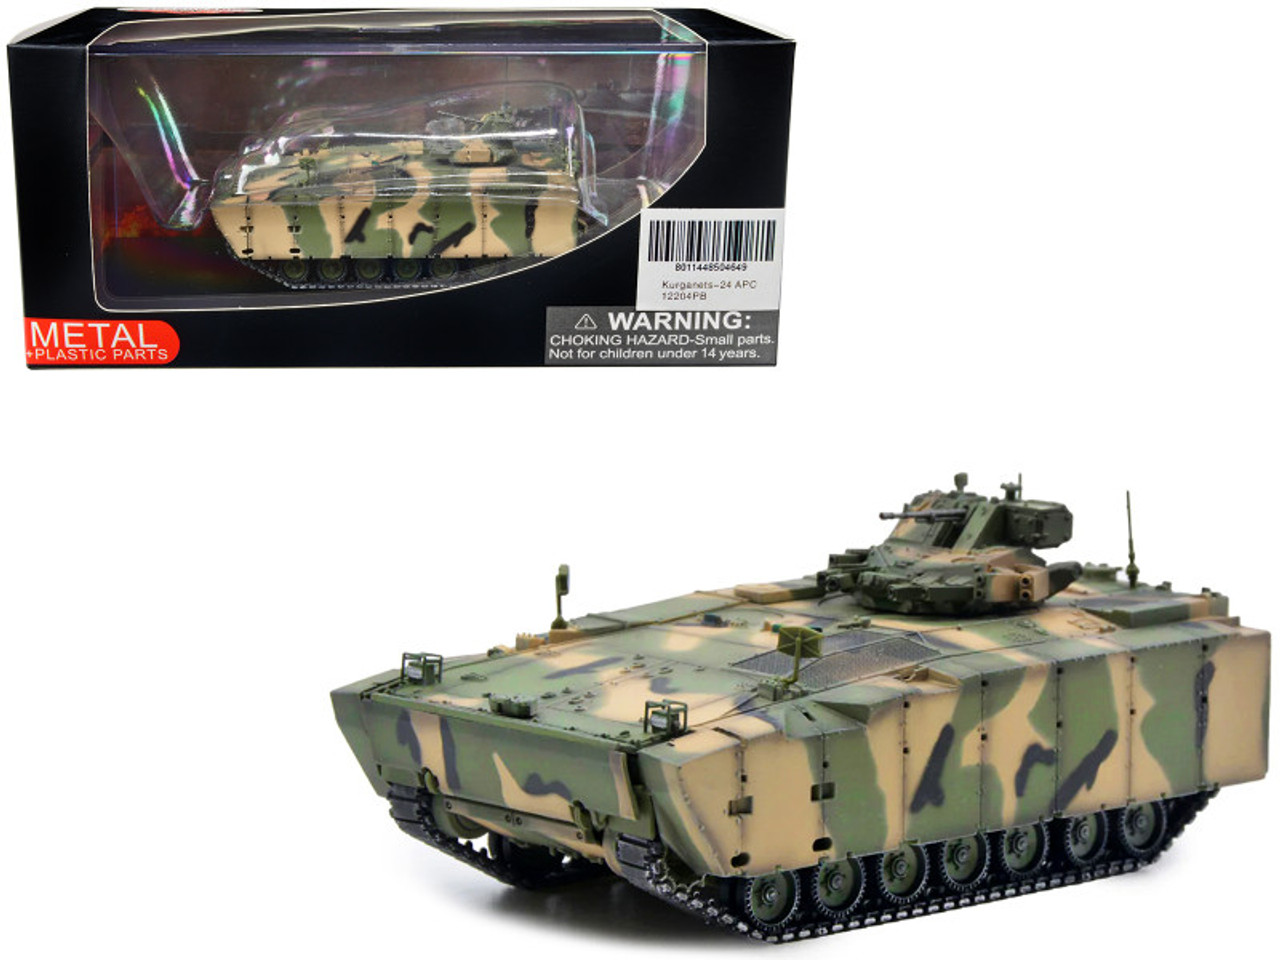 Russian (Object 693) Kurganets-25 Armored Personnel Carrier Camouflage 1/72 Diecast Model by Panzerkampf